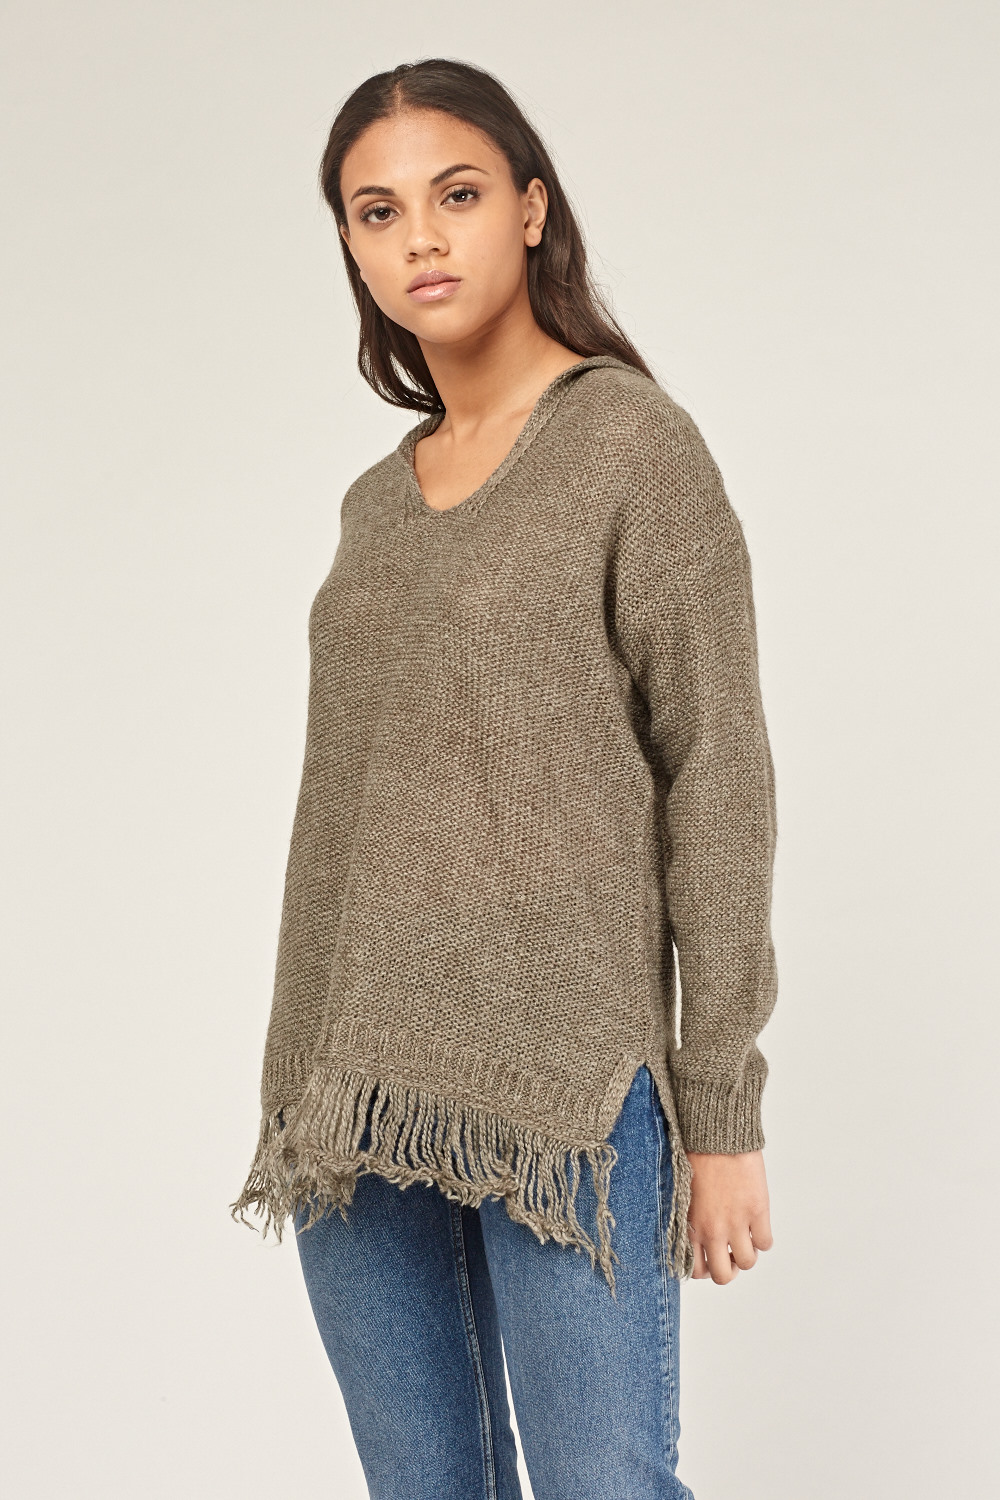 Hooded Fringed Trim Knitted Jumper - Just $7